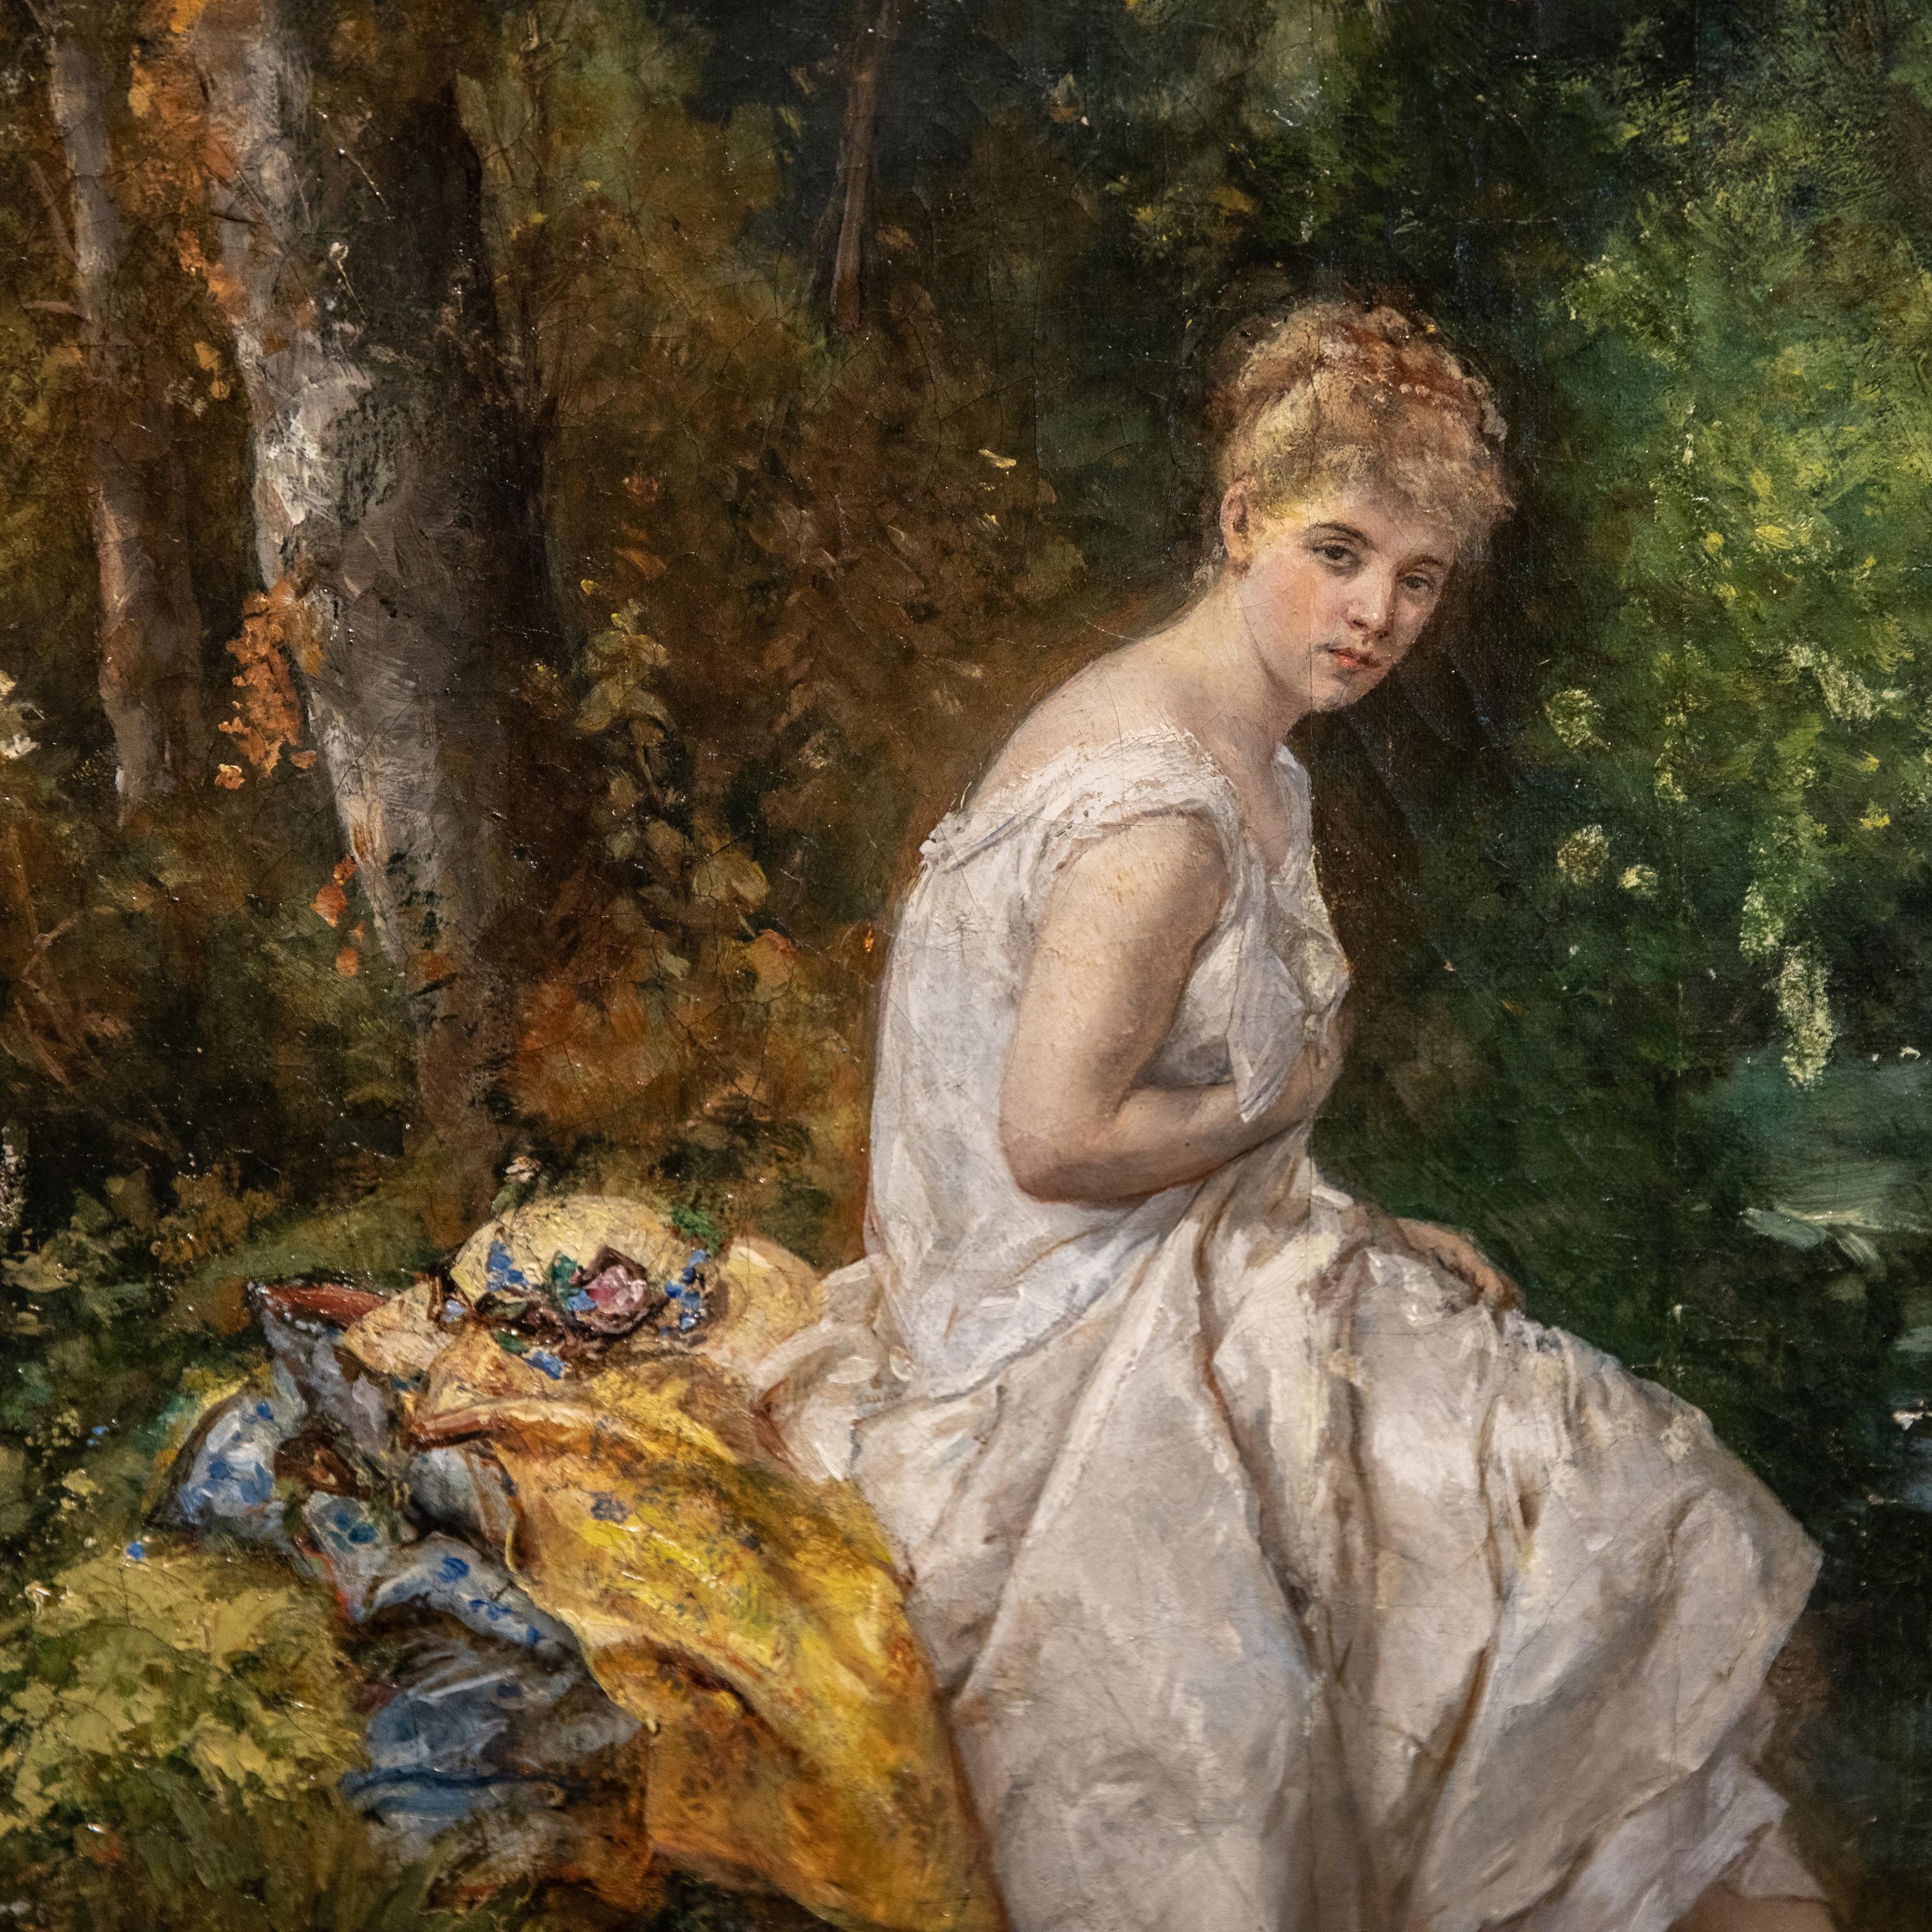 Dominique Baron Continental oil on canvas depicting young woman bathing in river surrounded by forest landscape, signed lower left: 